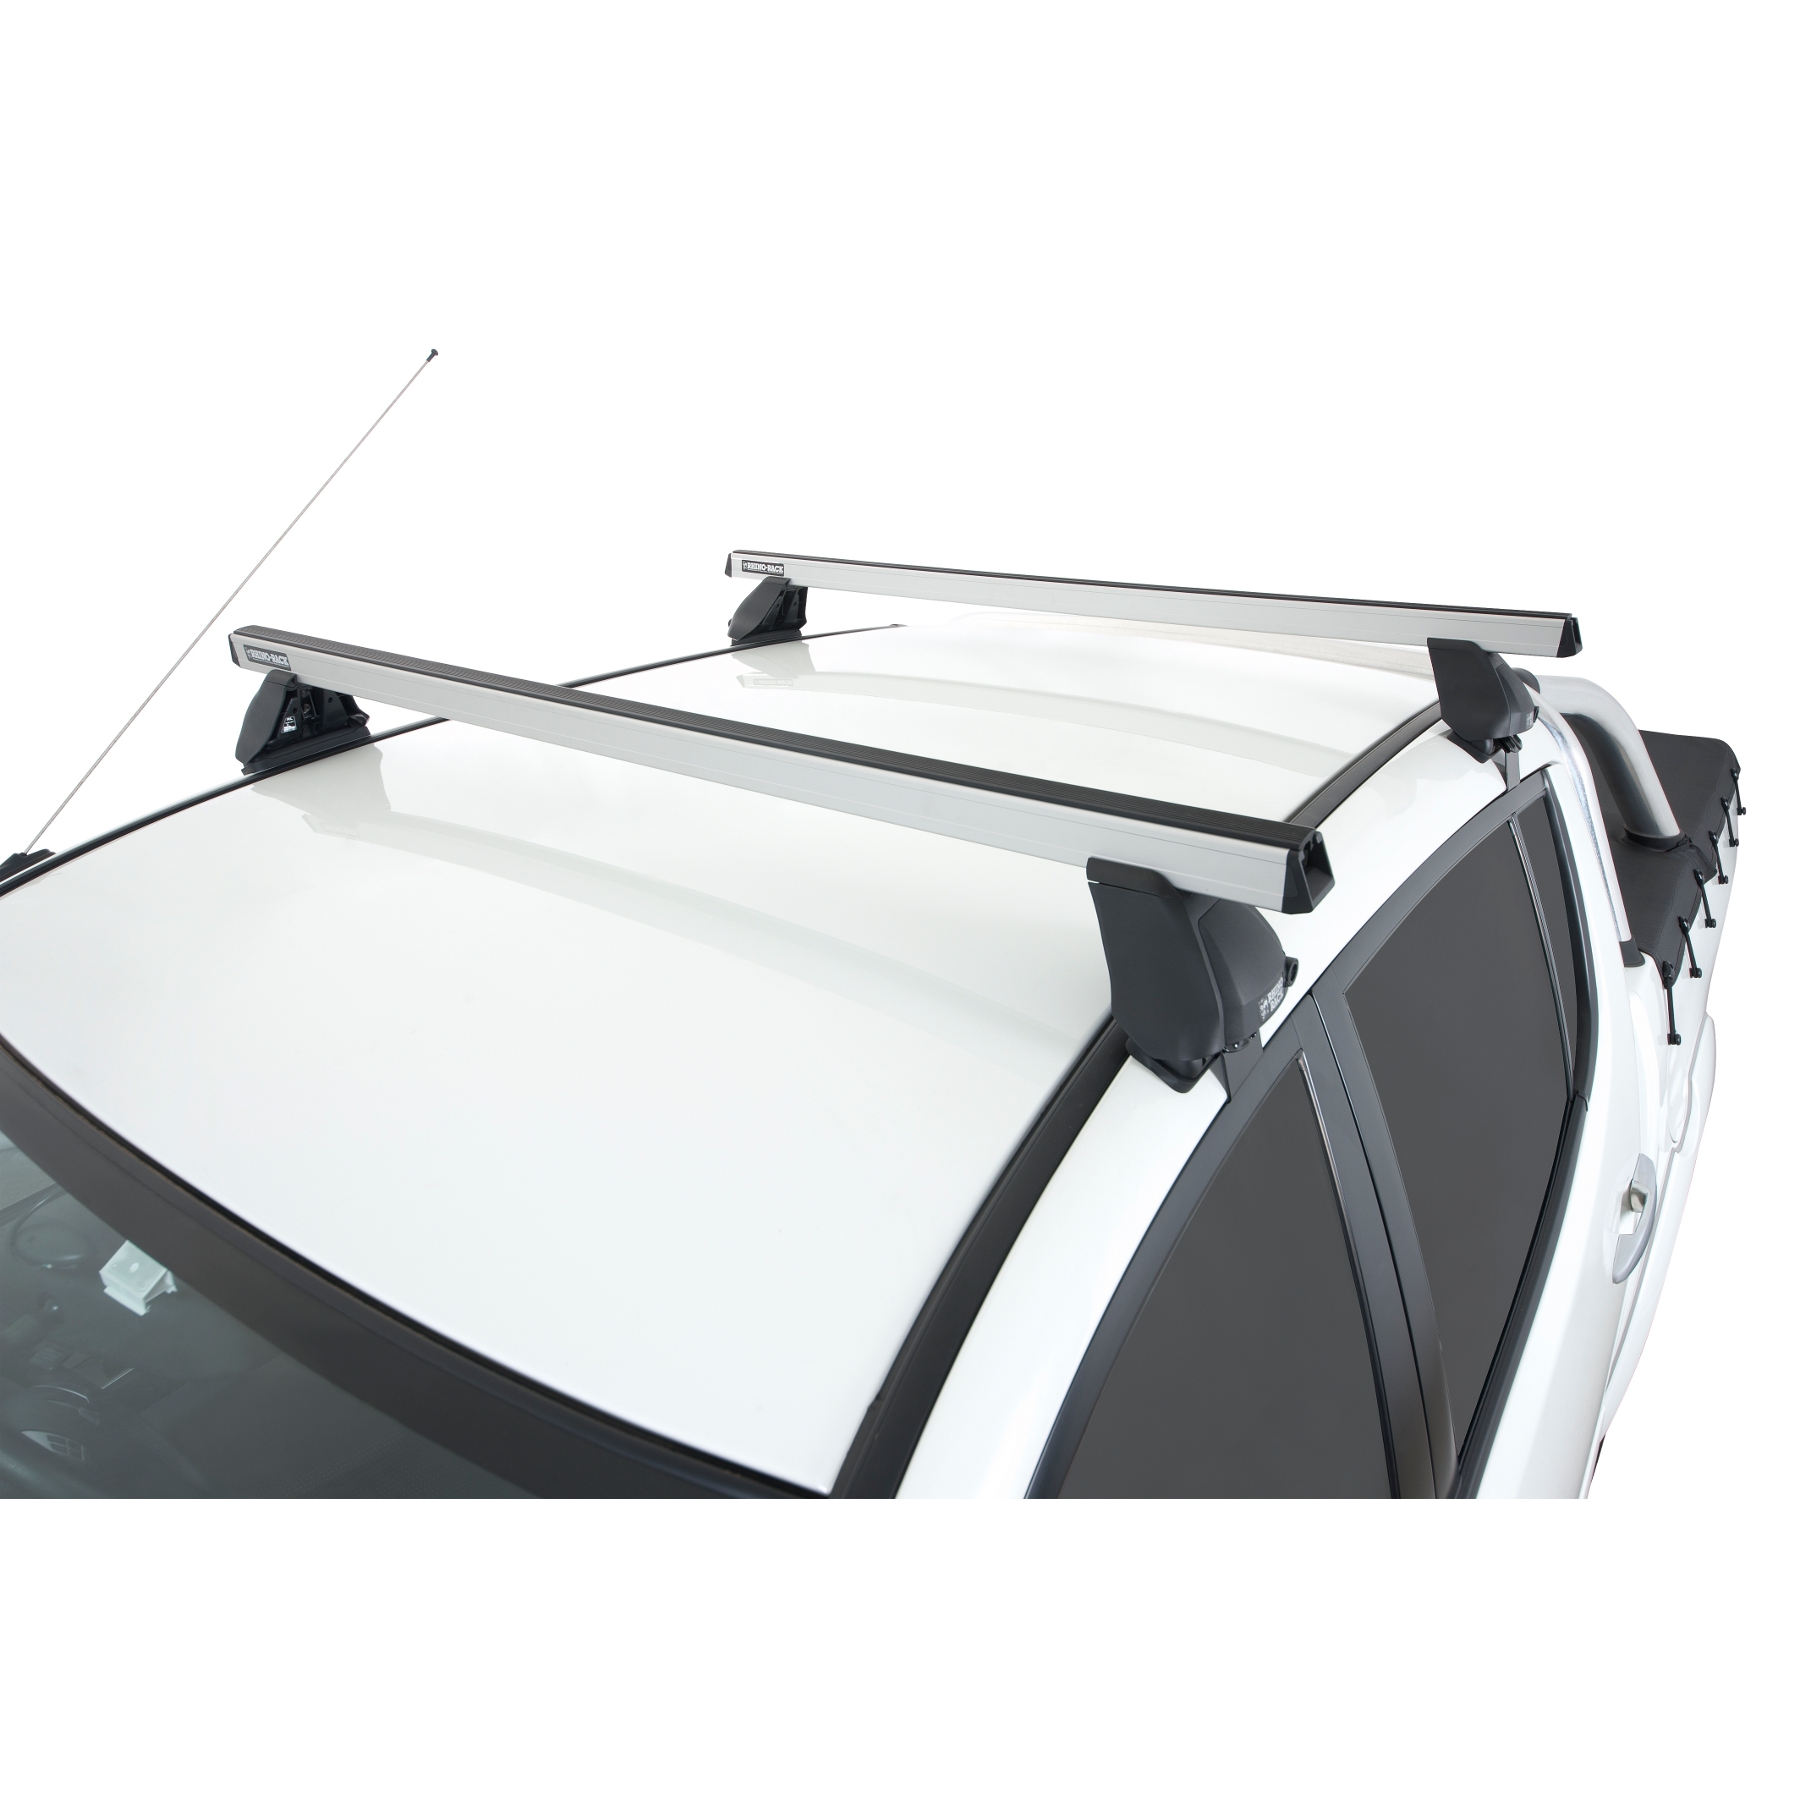 Heavy Duty 2500 Series Multi-fit Roof Rack System